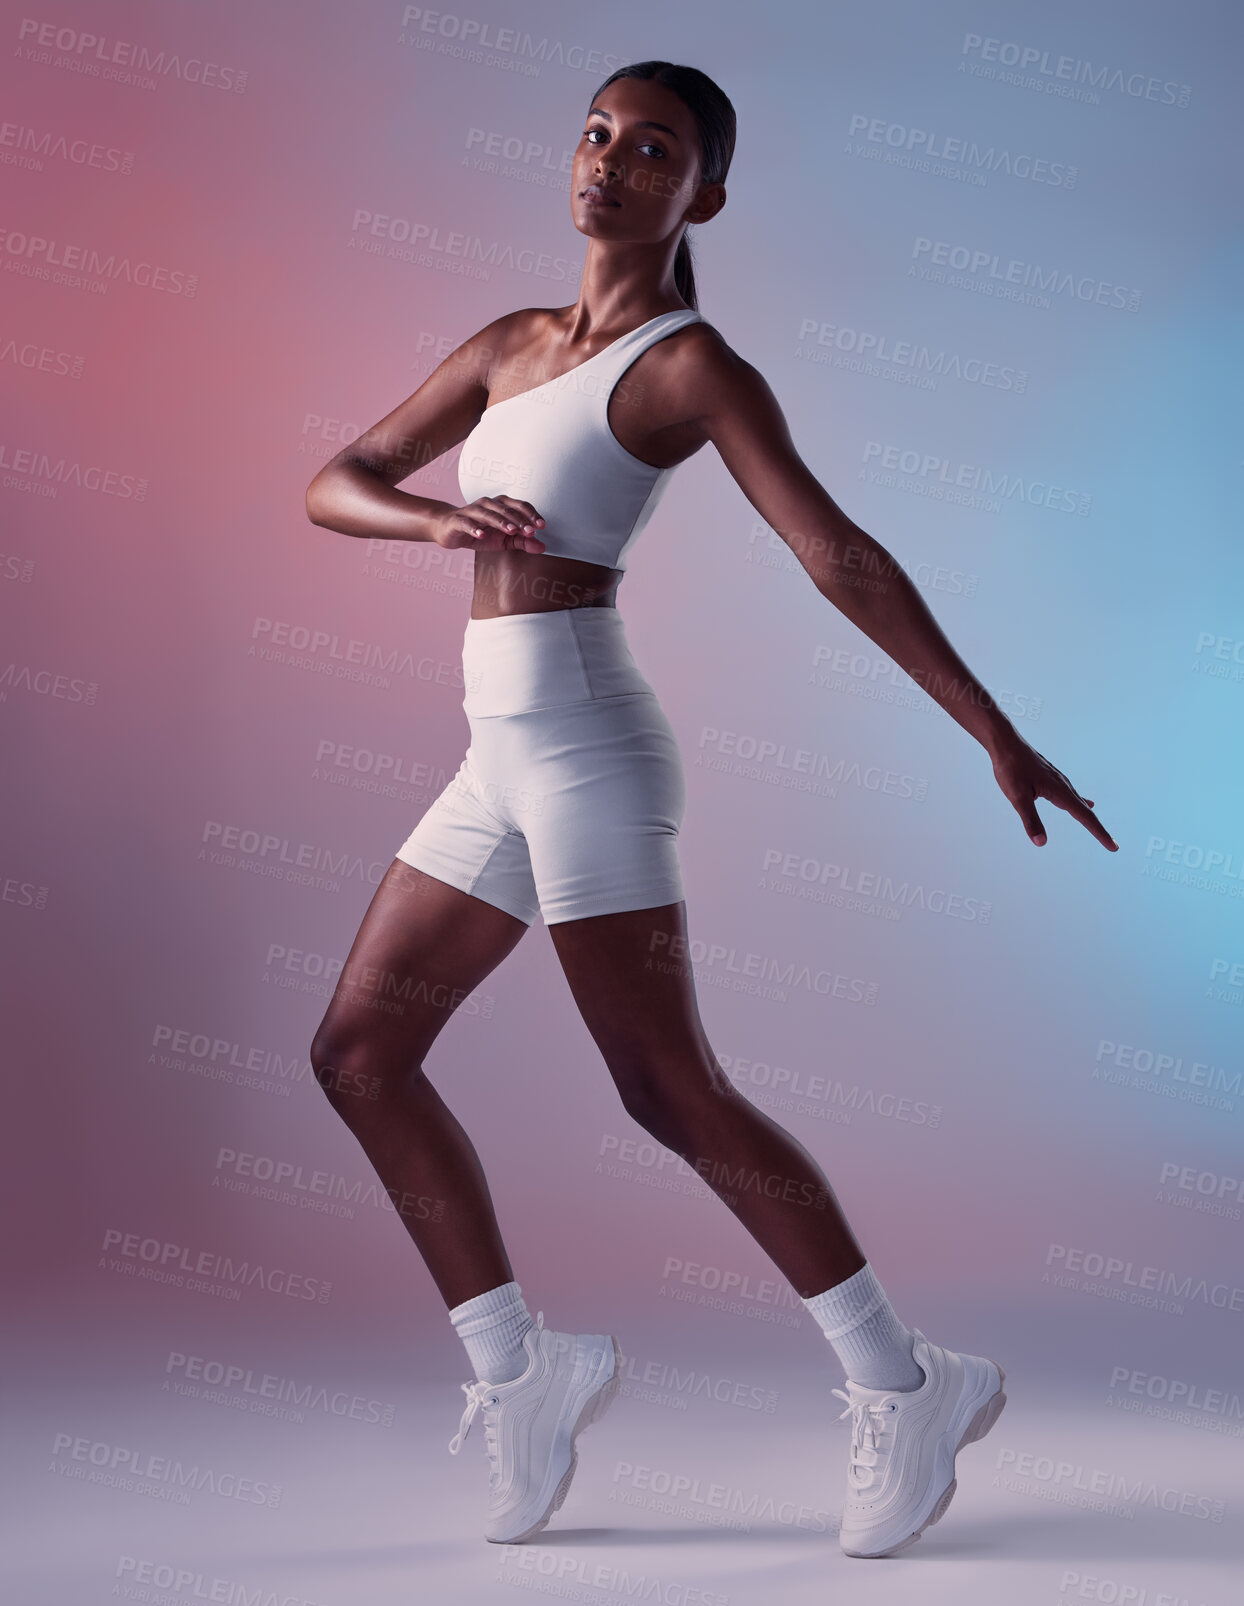 Buy stock photo Fitness, health and black woman stretching in studio portrait of healthy girl. Sports, exercise and form, motivation and balance for athlete cardio training for aerobics workout and woman in Jamaica.